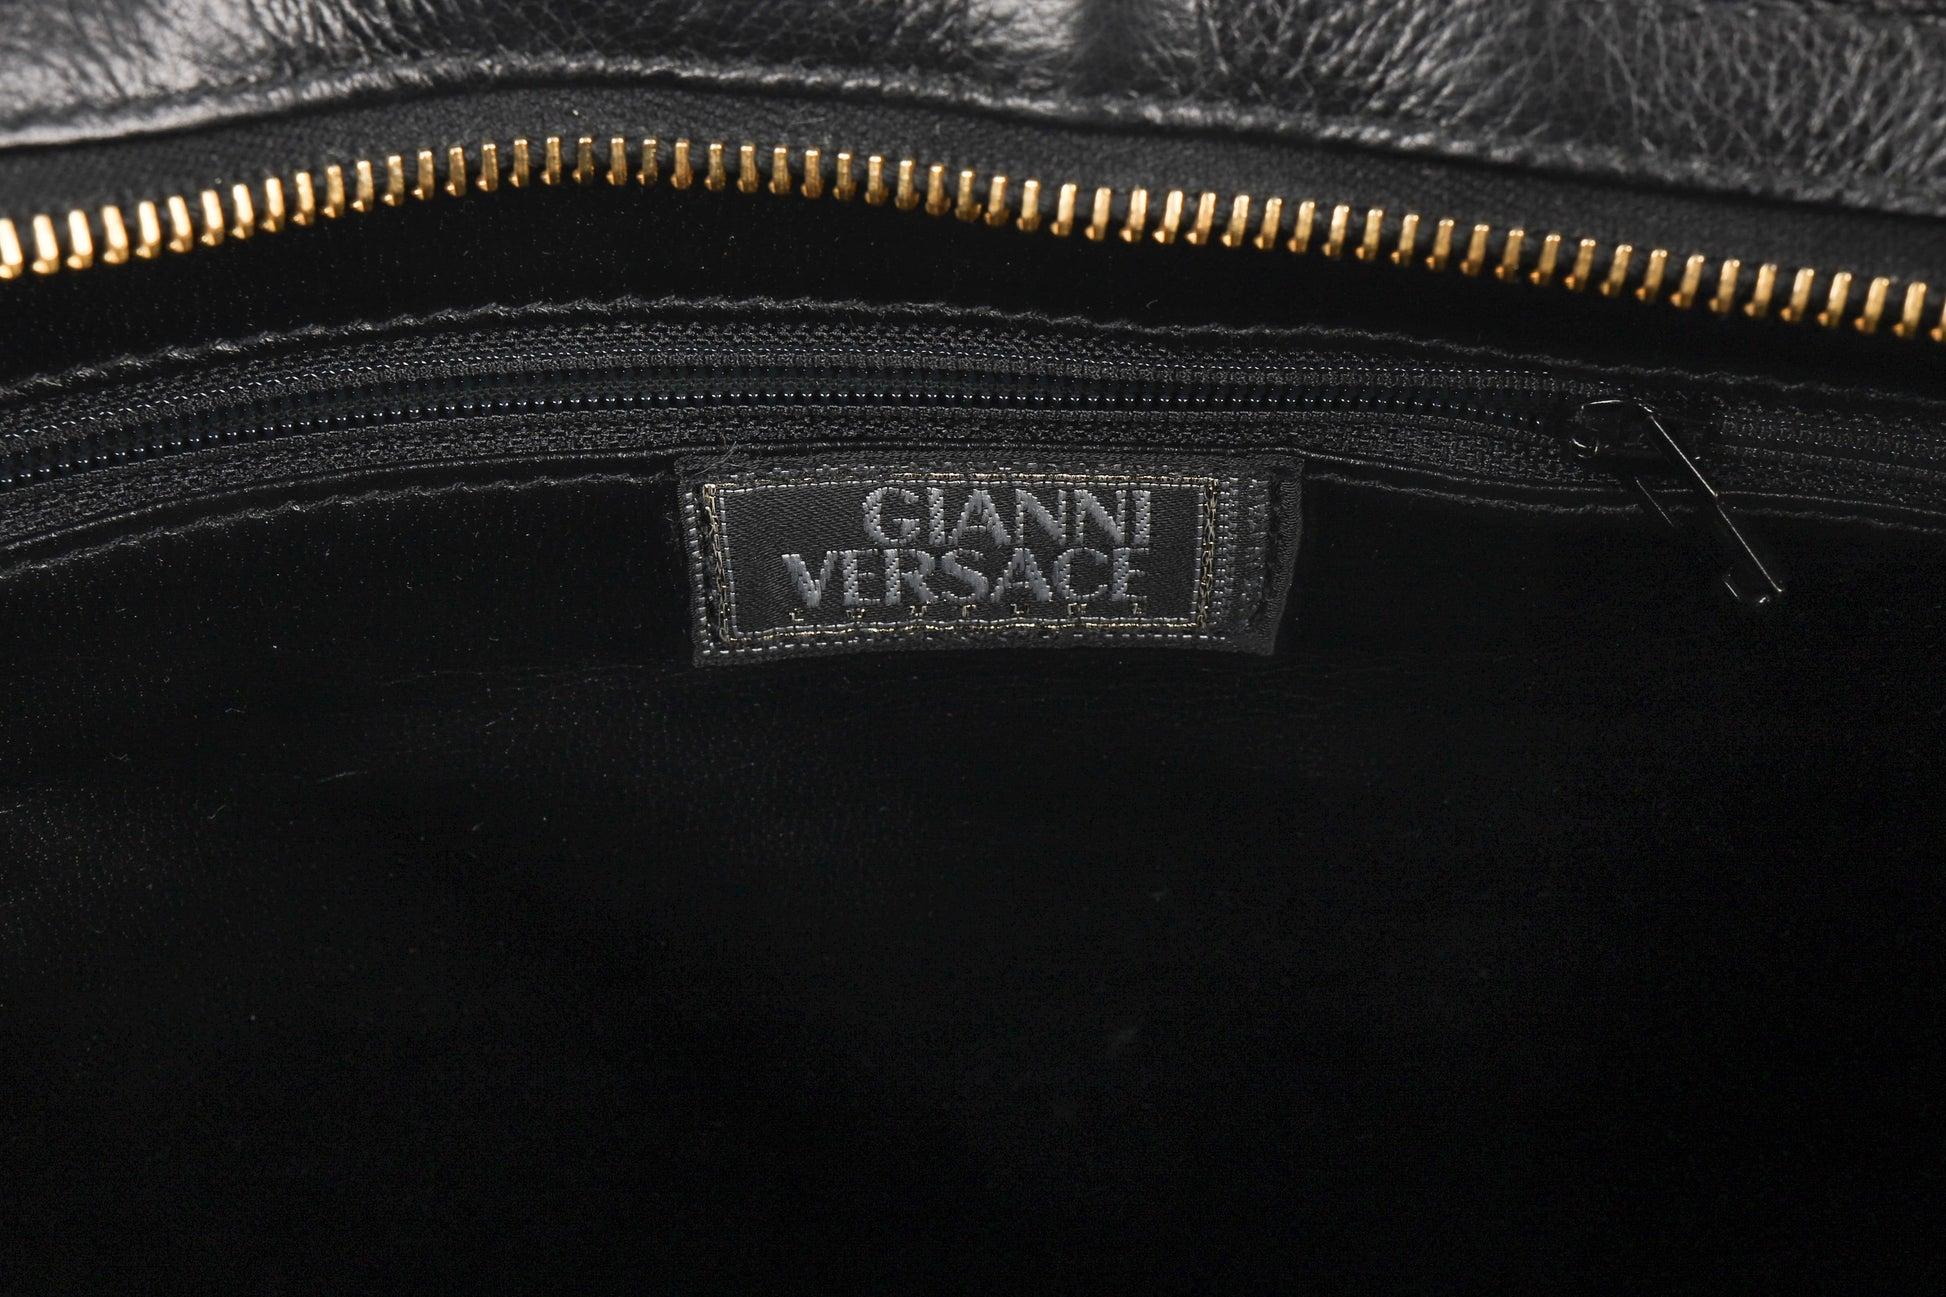 Gianni Versace Black Leather Bag with Golden Metal Elements 4